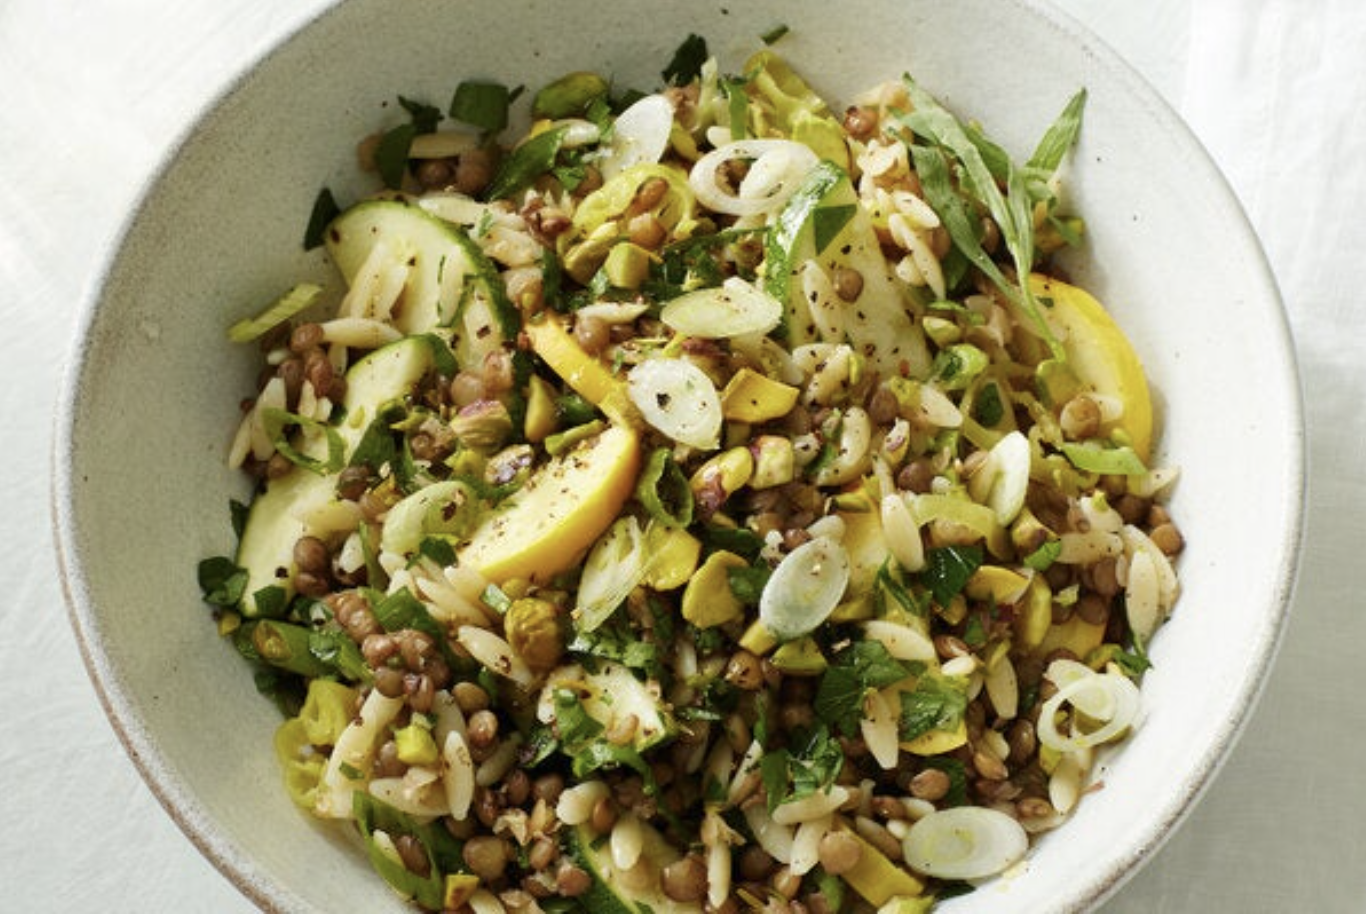 Orzo pasta salad with lentils in white dish